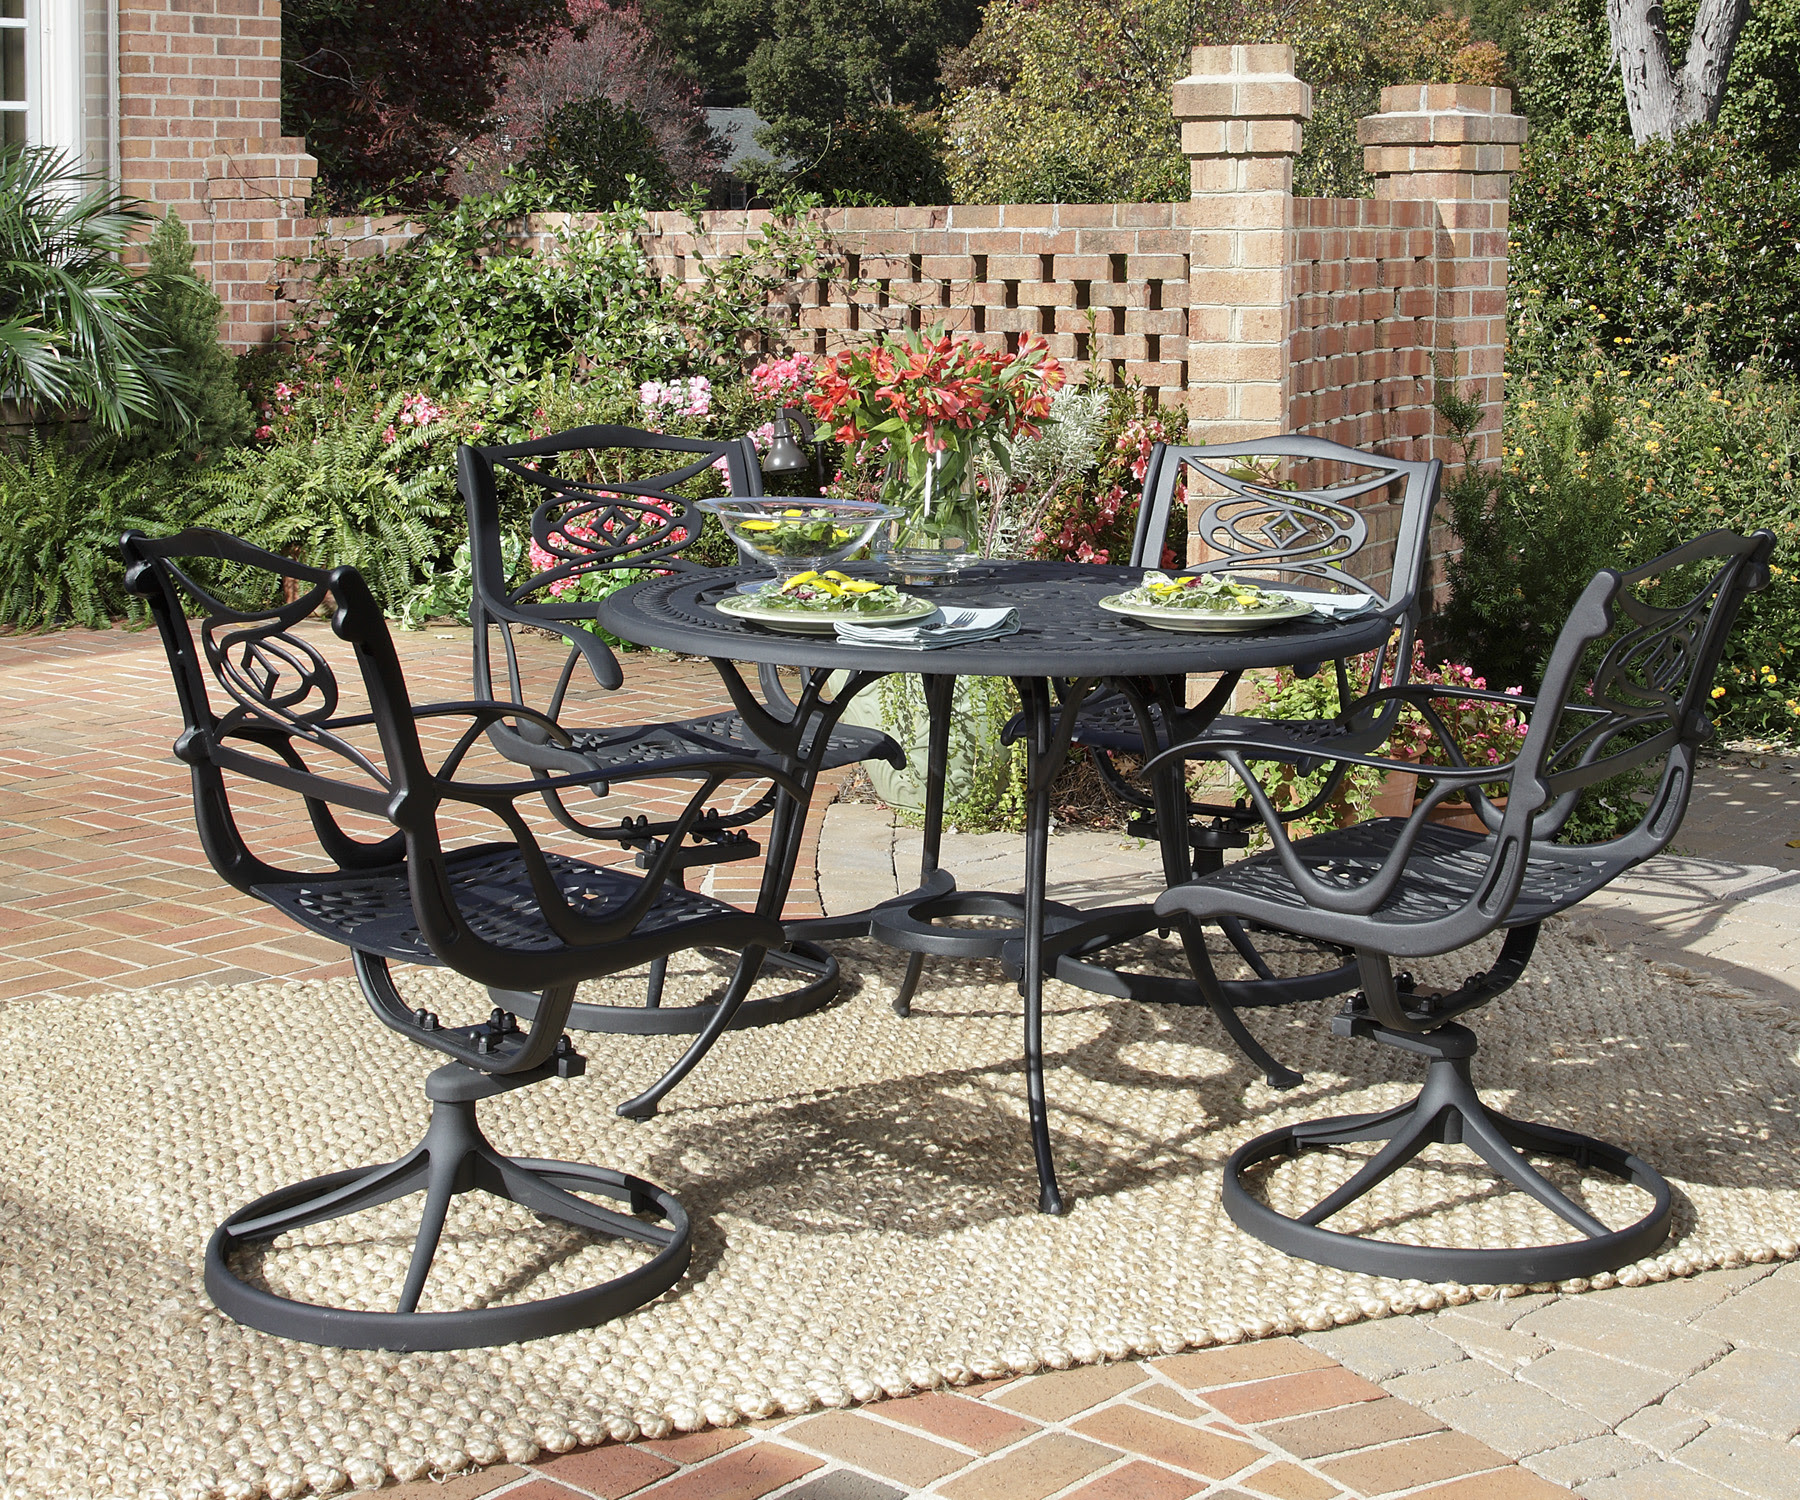 OUTDOOR DINING TABLE CHAIRS | Chair Pads & Cushions